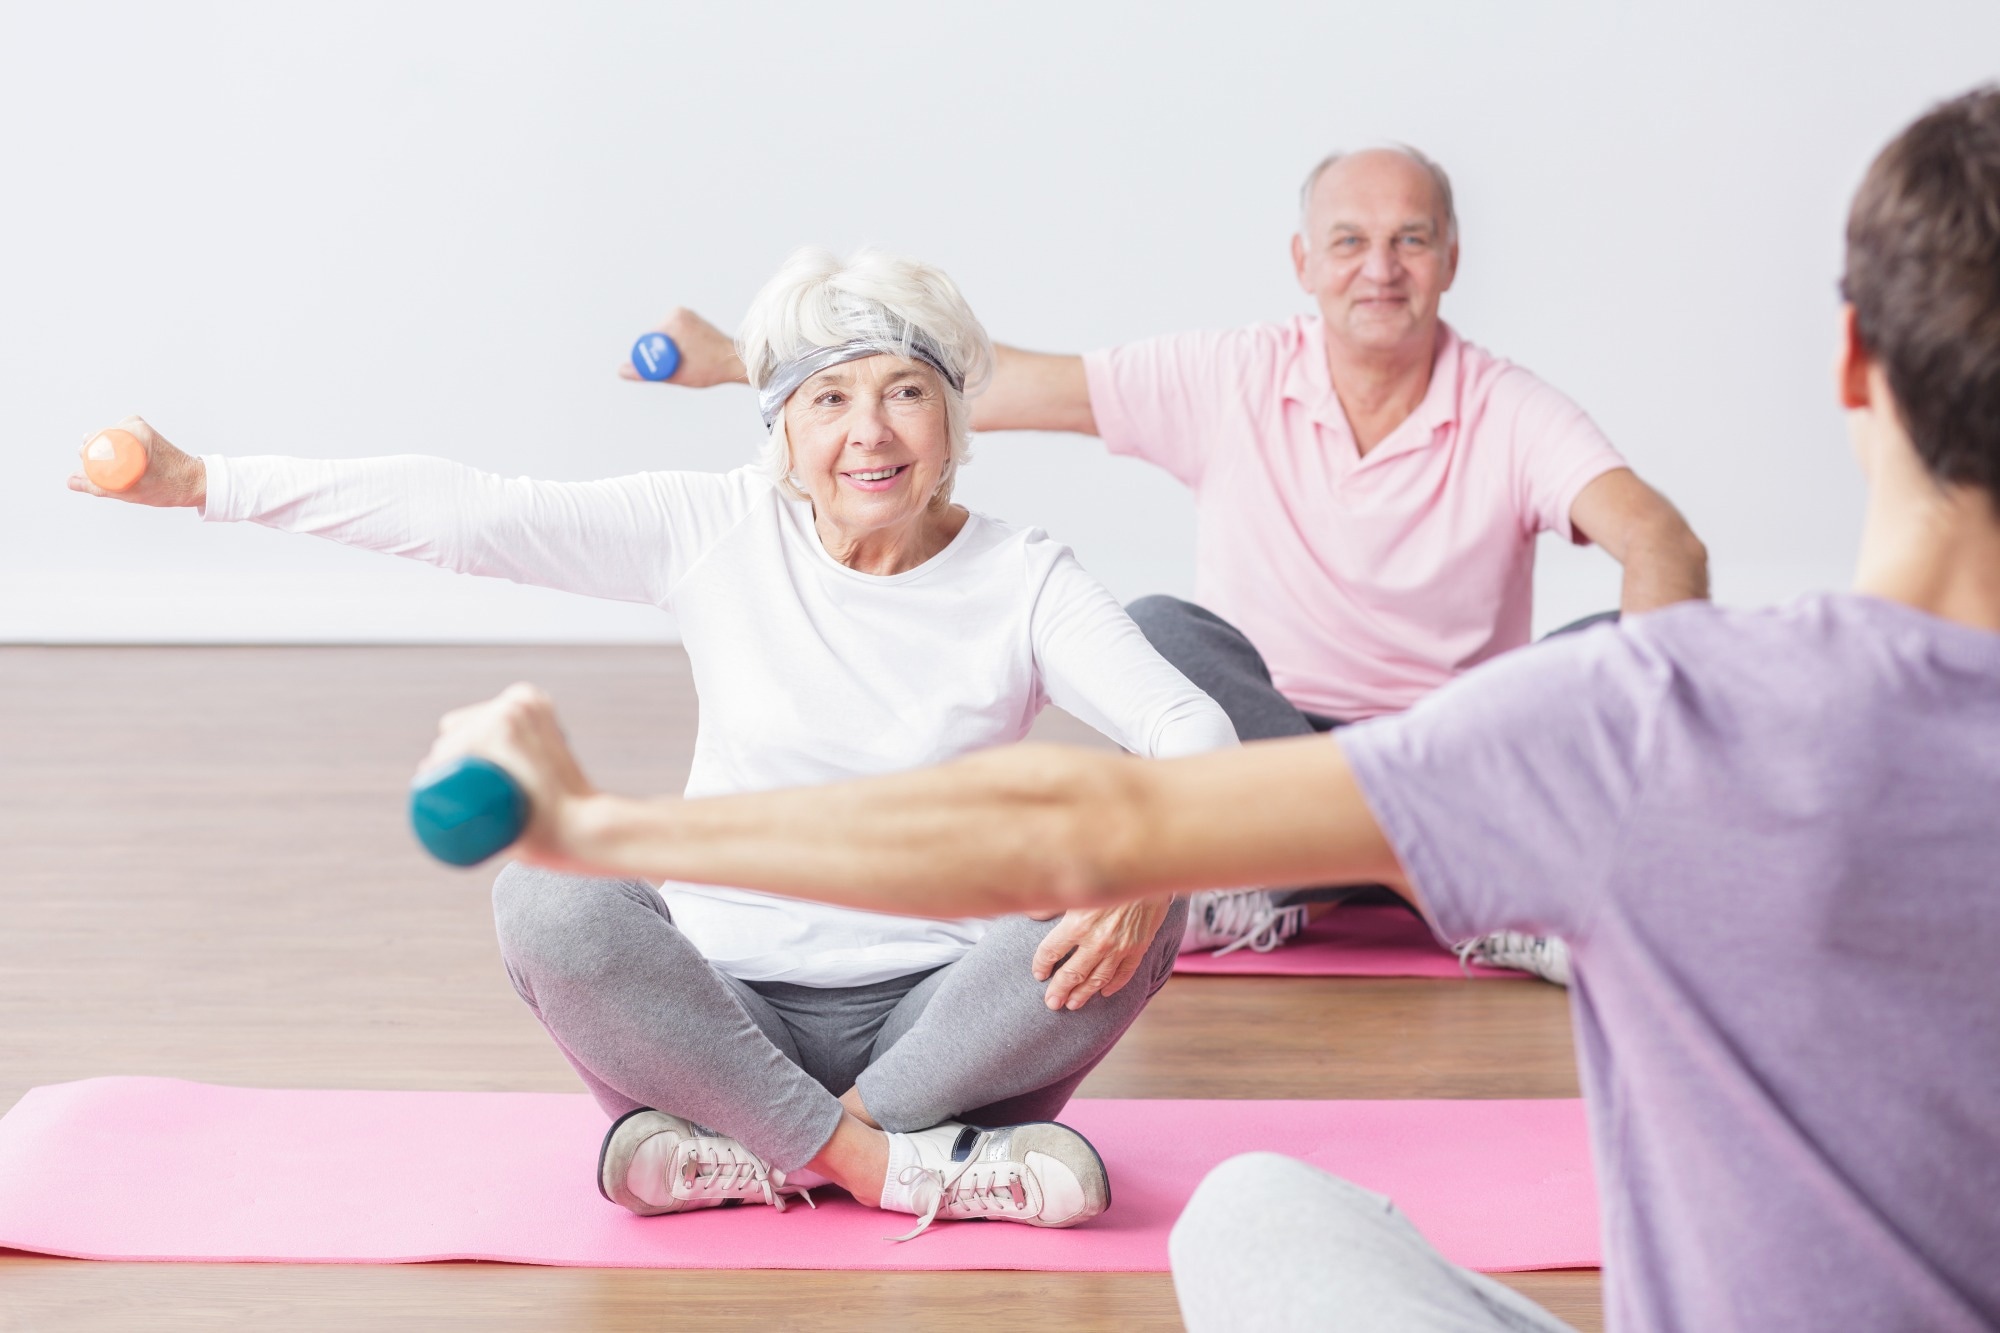 Exercise prevents the incidence of dementia in older people with